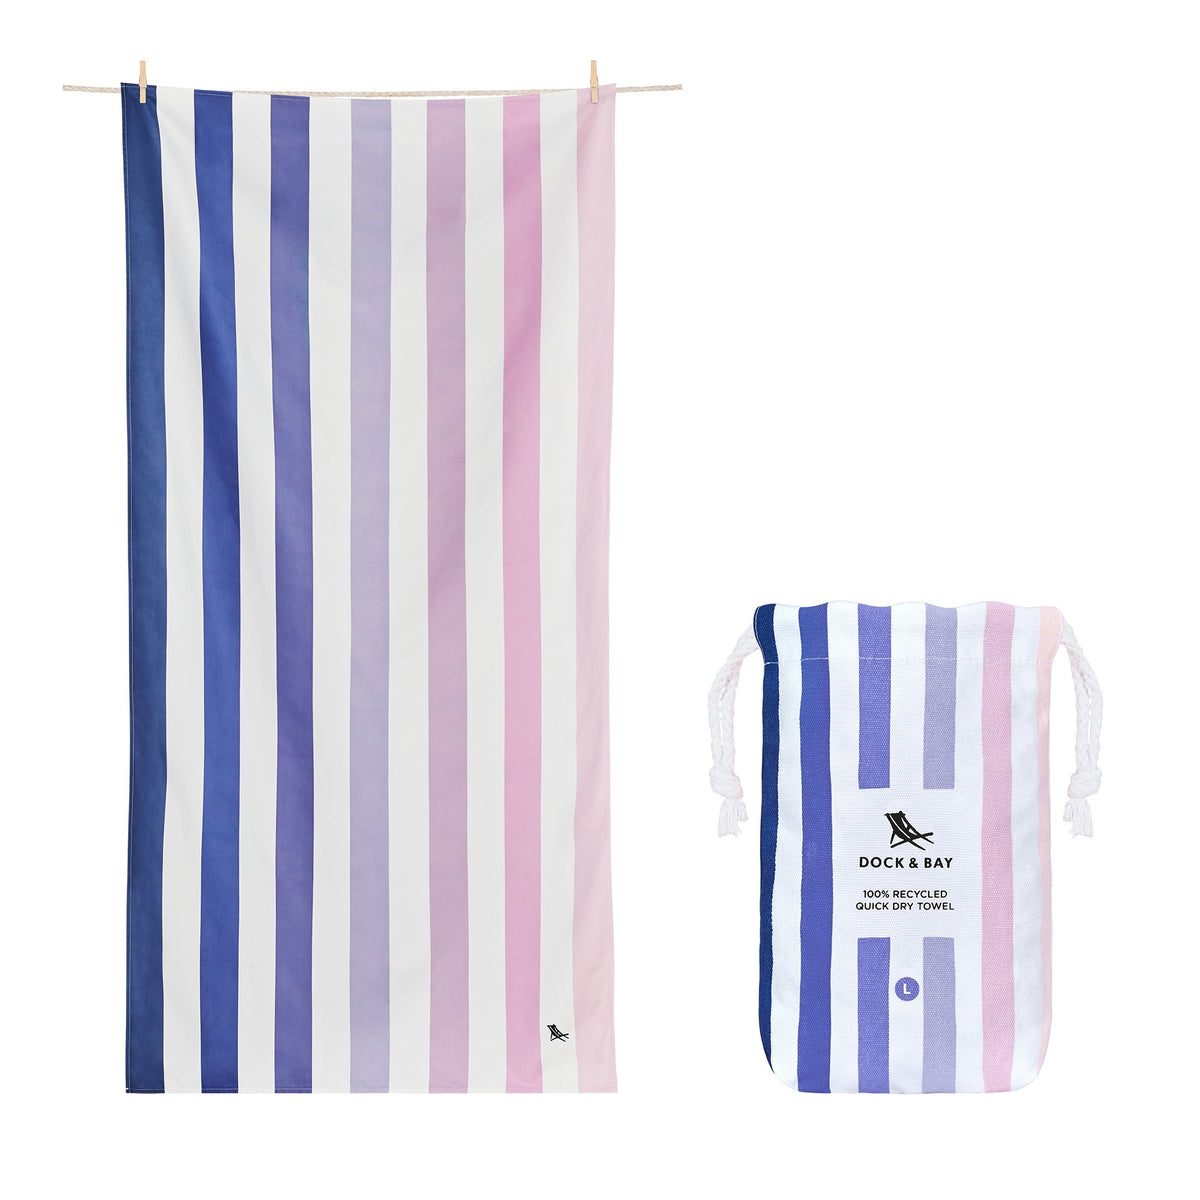 Dock and Bay Quick Dry Towel - Dusk to Dawn - The Mewstone Candle Co